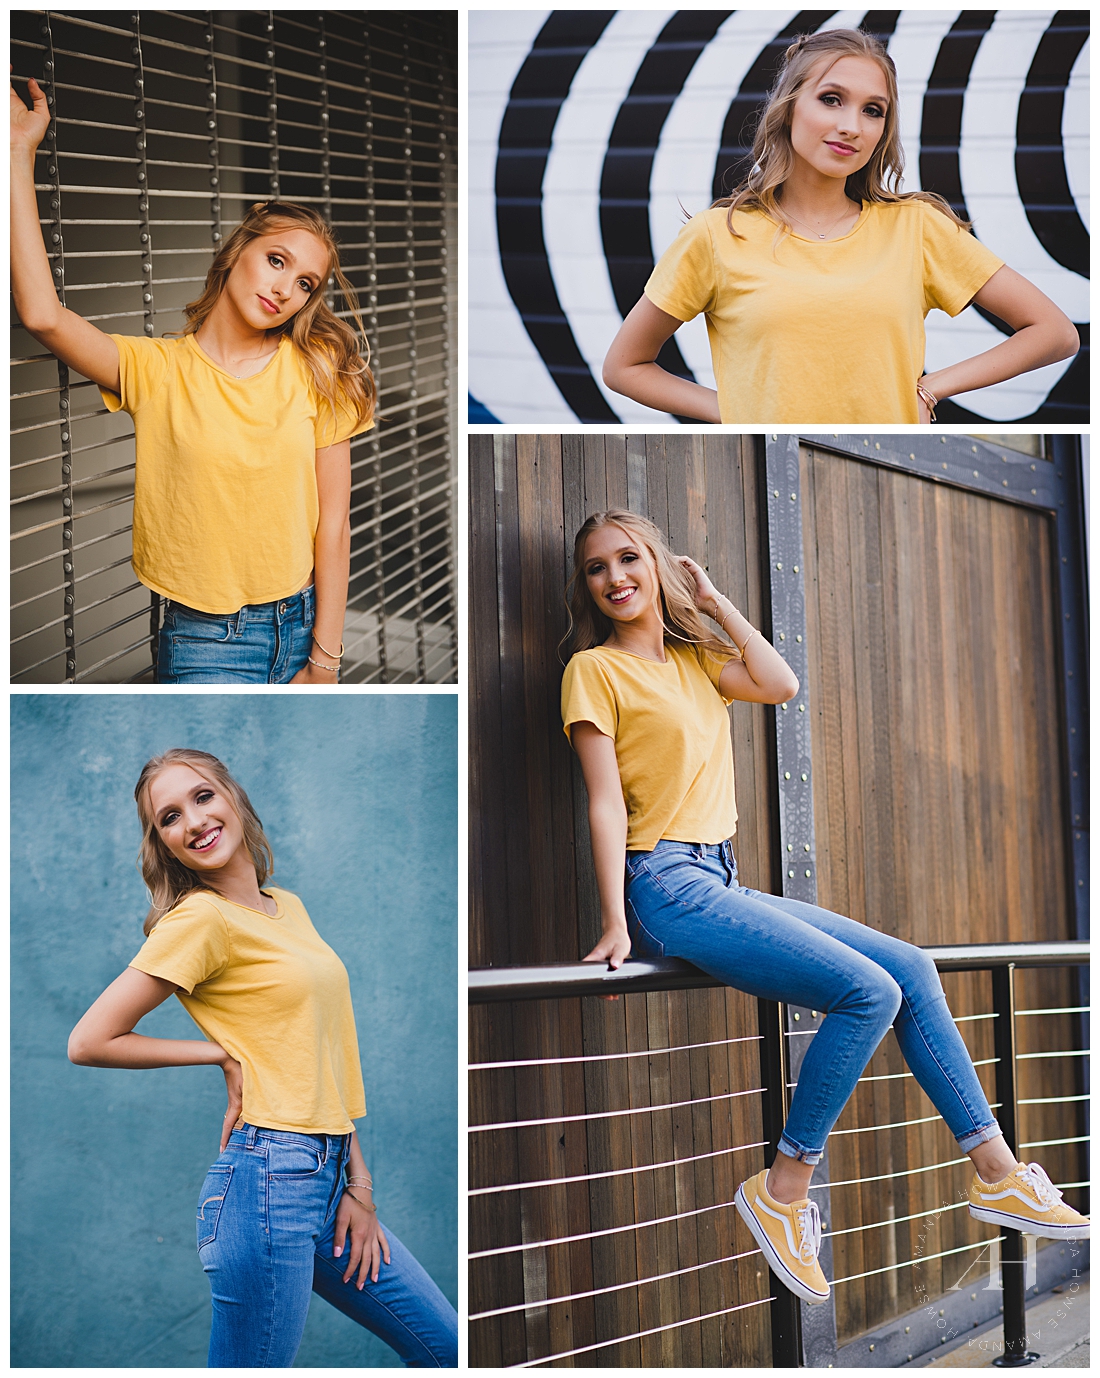 Downtown Tacoma Senior Portraits | This urban senior portrait session will inspire you! | Photographed by the Best Tacoma Senior Photographer Amanda Howse